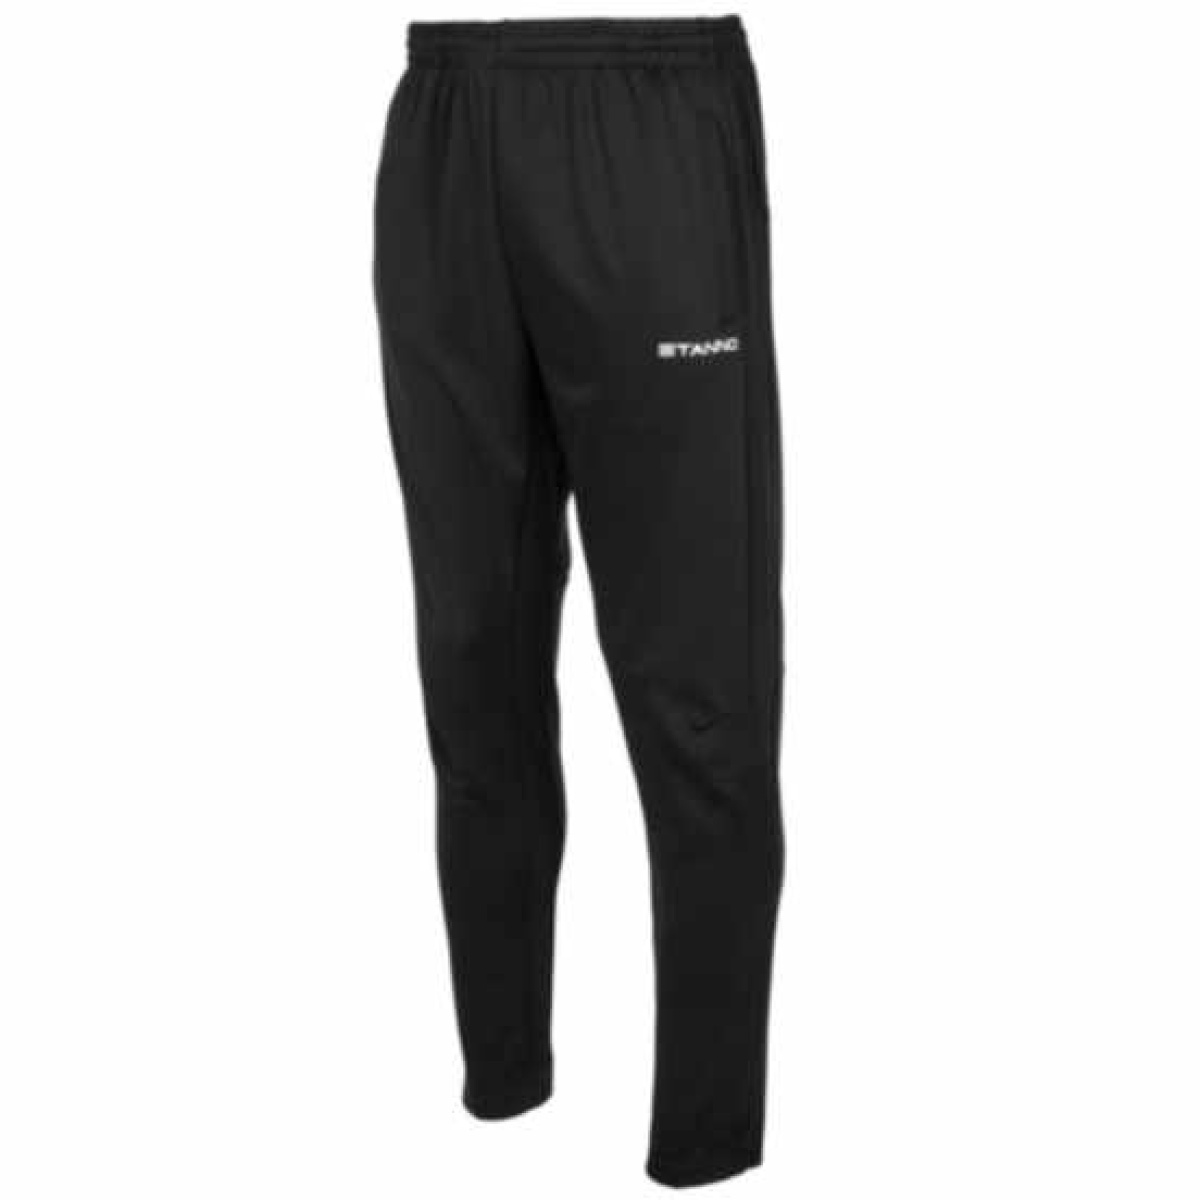 Runnymede Swimming Clu - Track Pant tight to leg, Runnymede Swimming Club